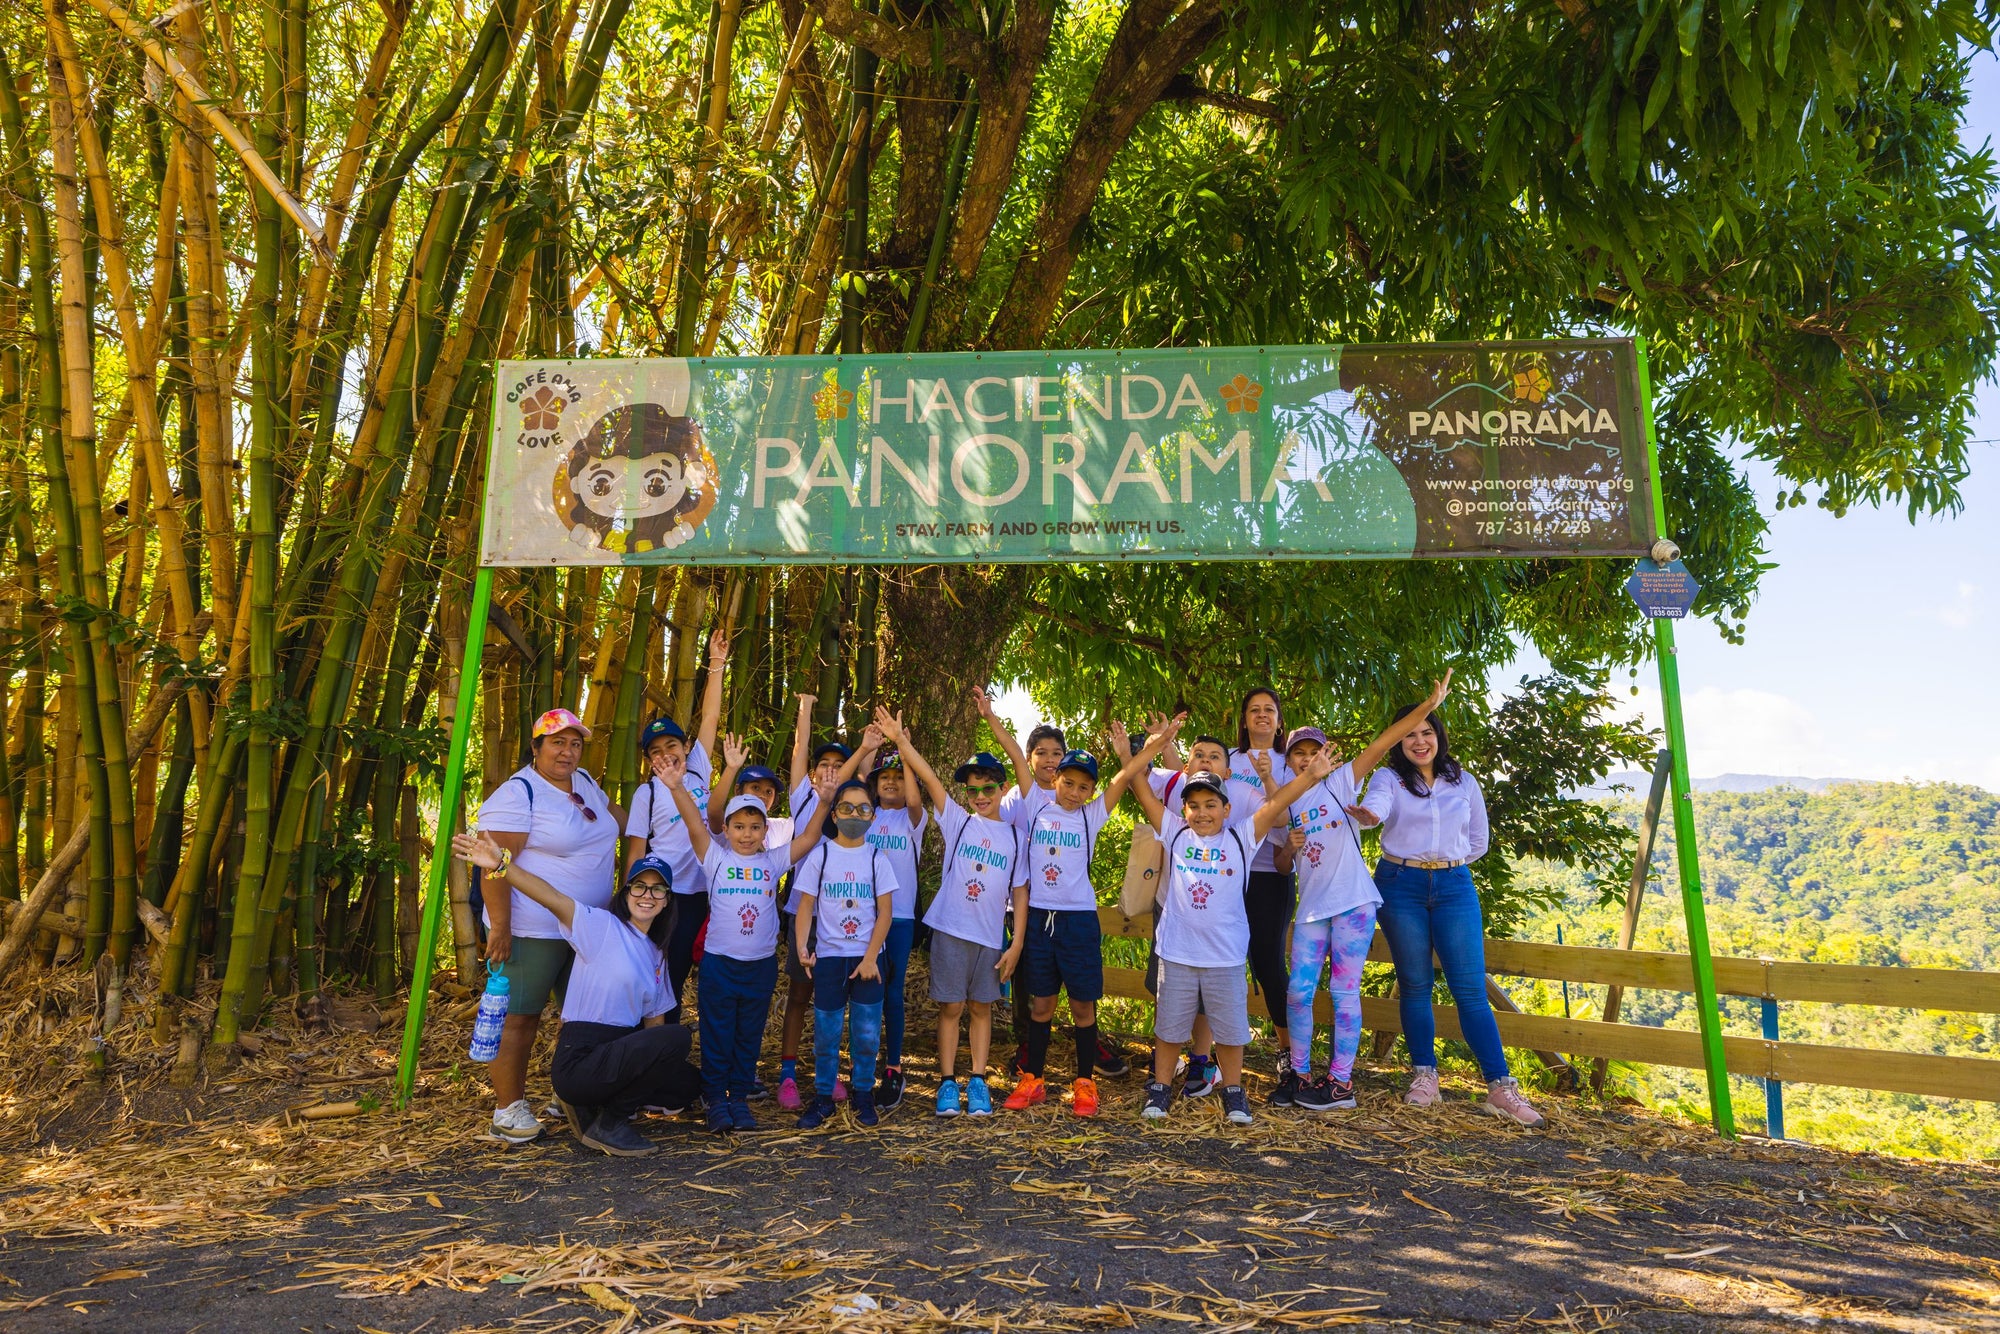 Kids and Friends of Puerto Rico at Panorama Farm